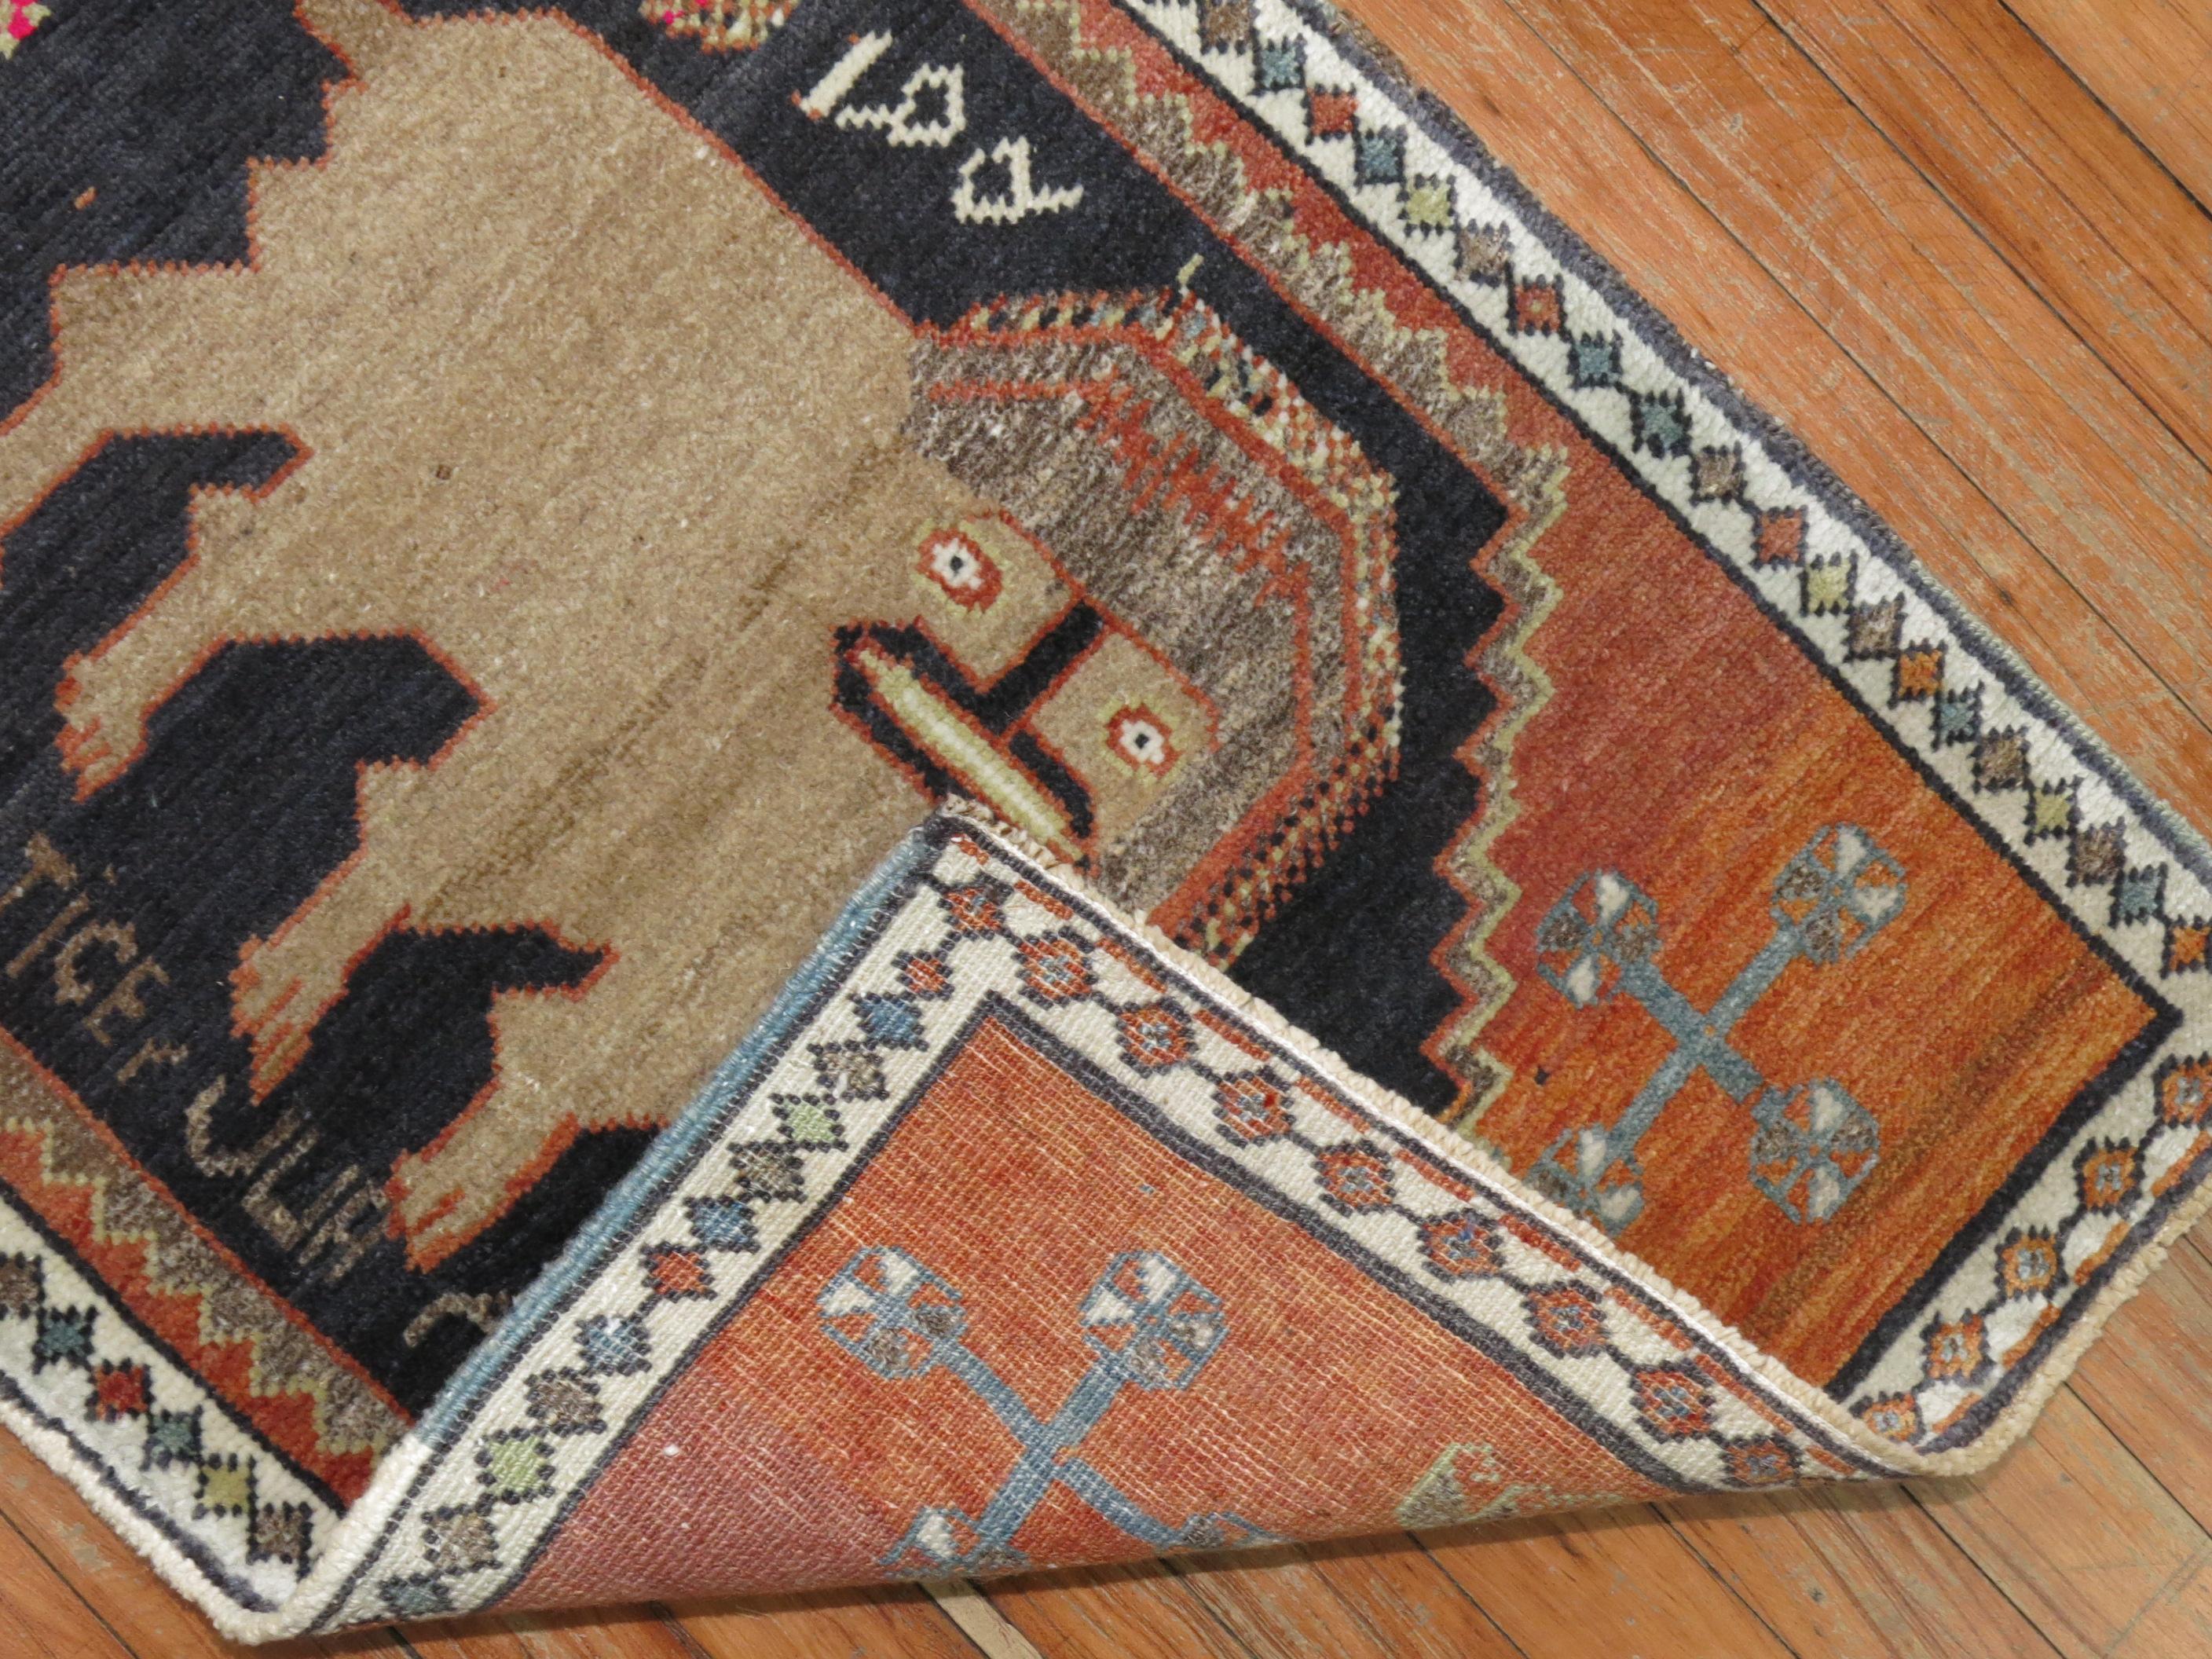 A mid-20th century Turkish rug depicting a stand alone camel color lion on a charcoal medallion and orange field. Weaver inscribed his name under the lion. Pretty Cool, right?

Measures: 1'10